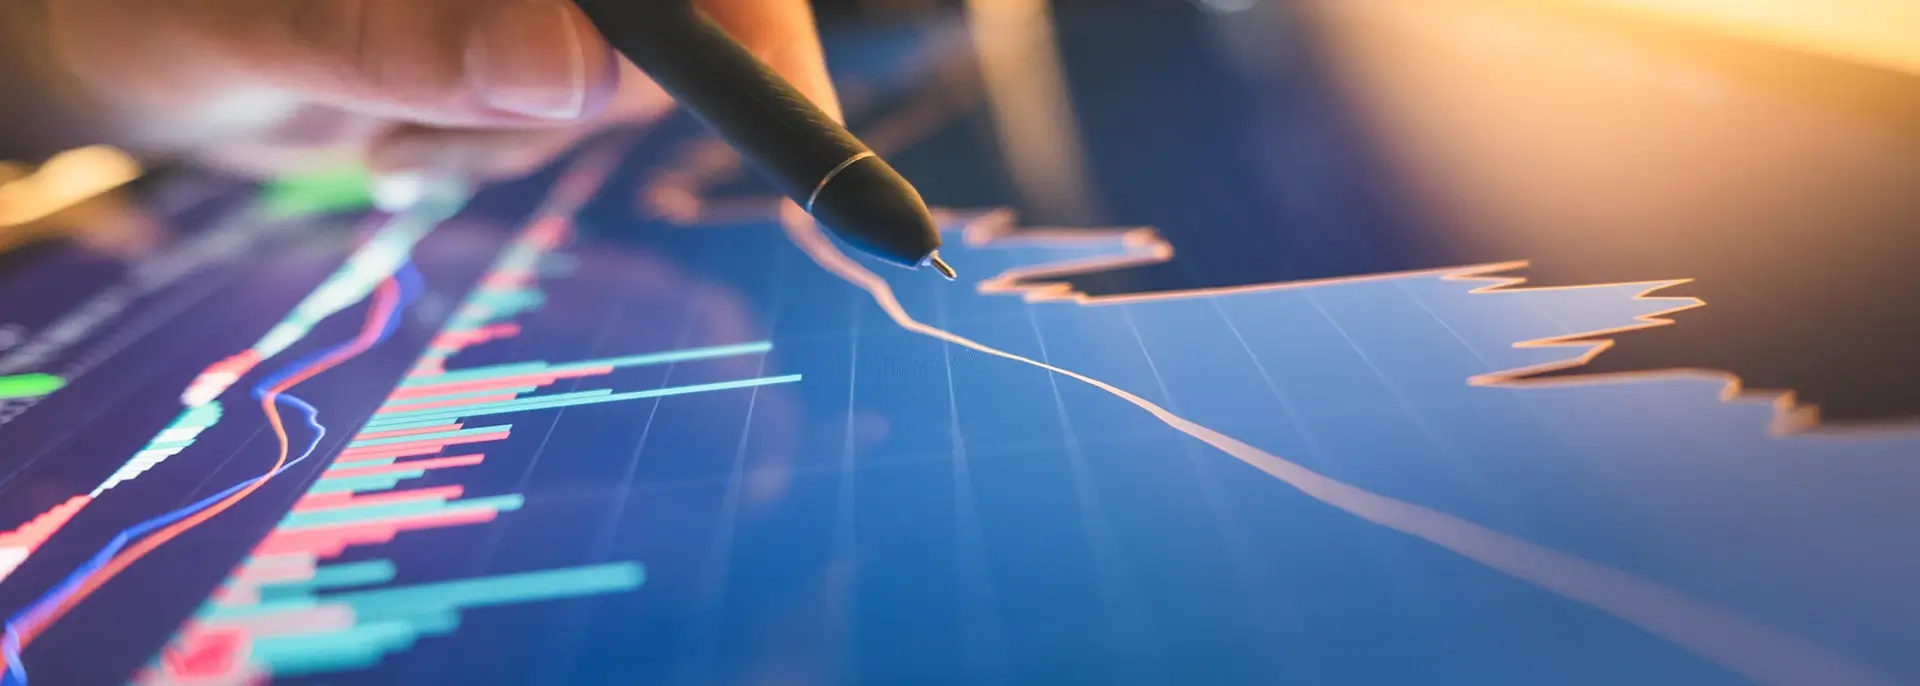 Person tracing a graph with a stylus